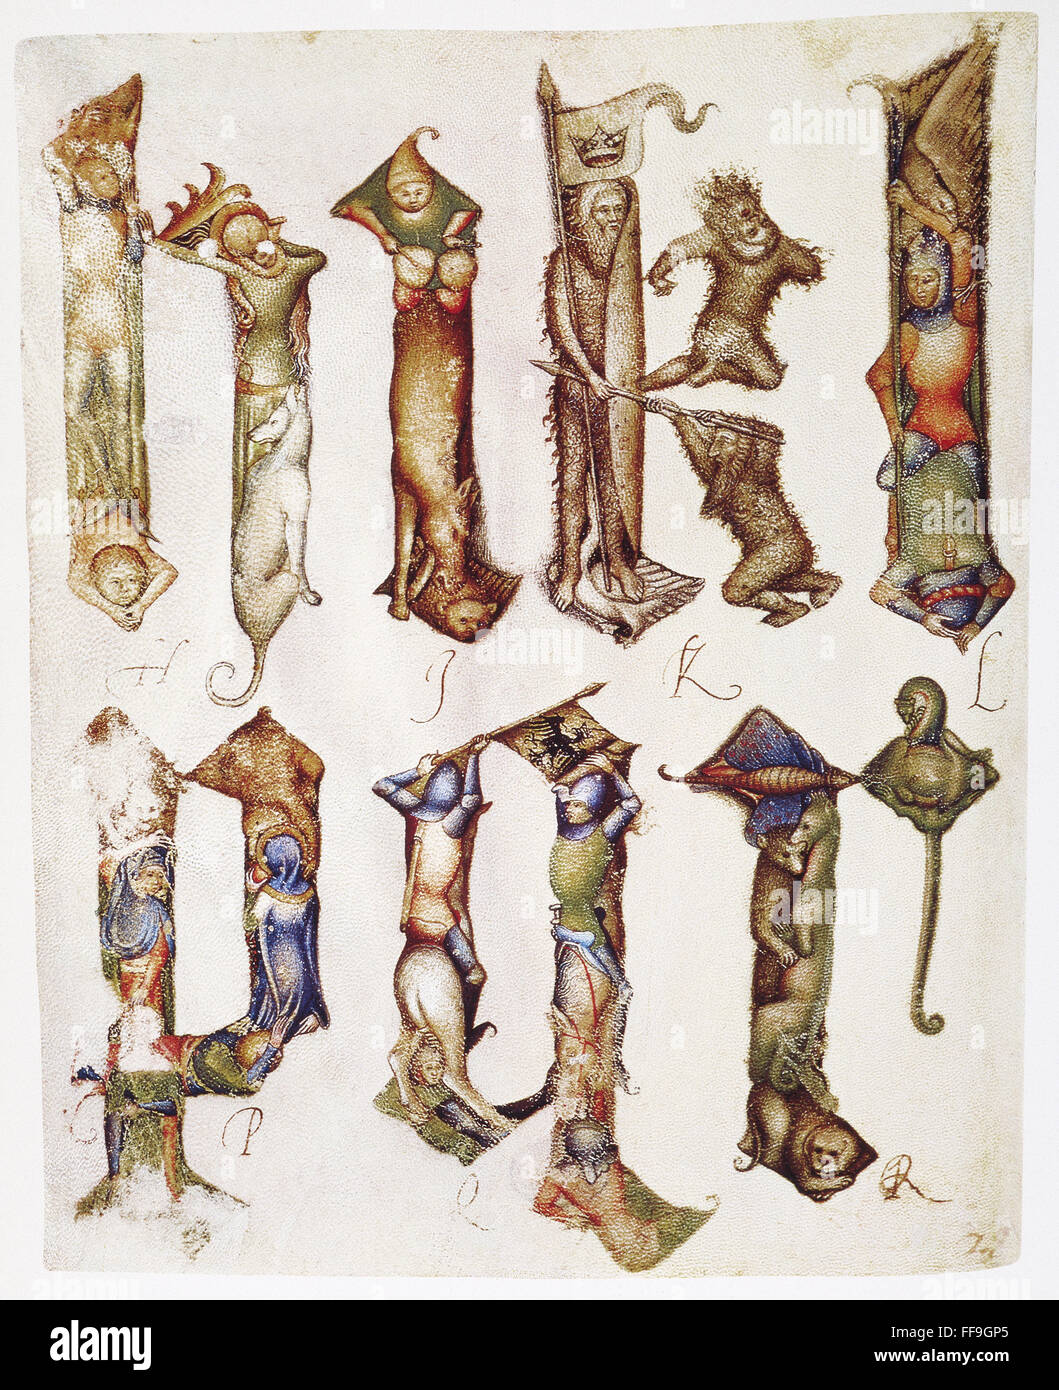 FIGURE ALPHABET, c1390. /nFigure alphabet from 'H' to 'R' from the sketchbook of Goivanni del Grassi, c1390. Stock Photo